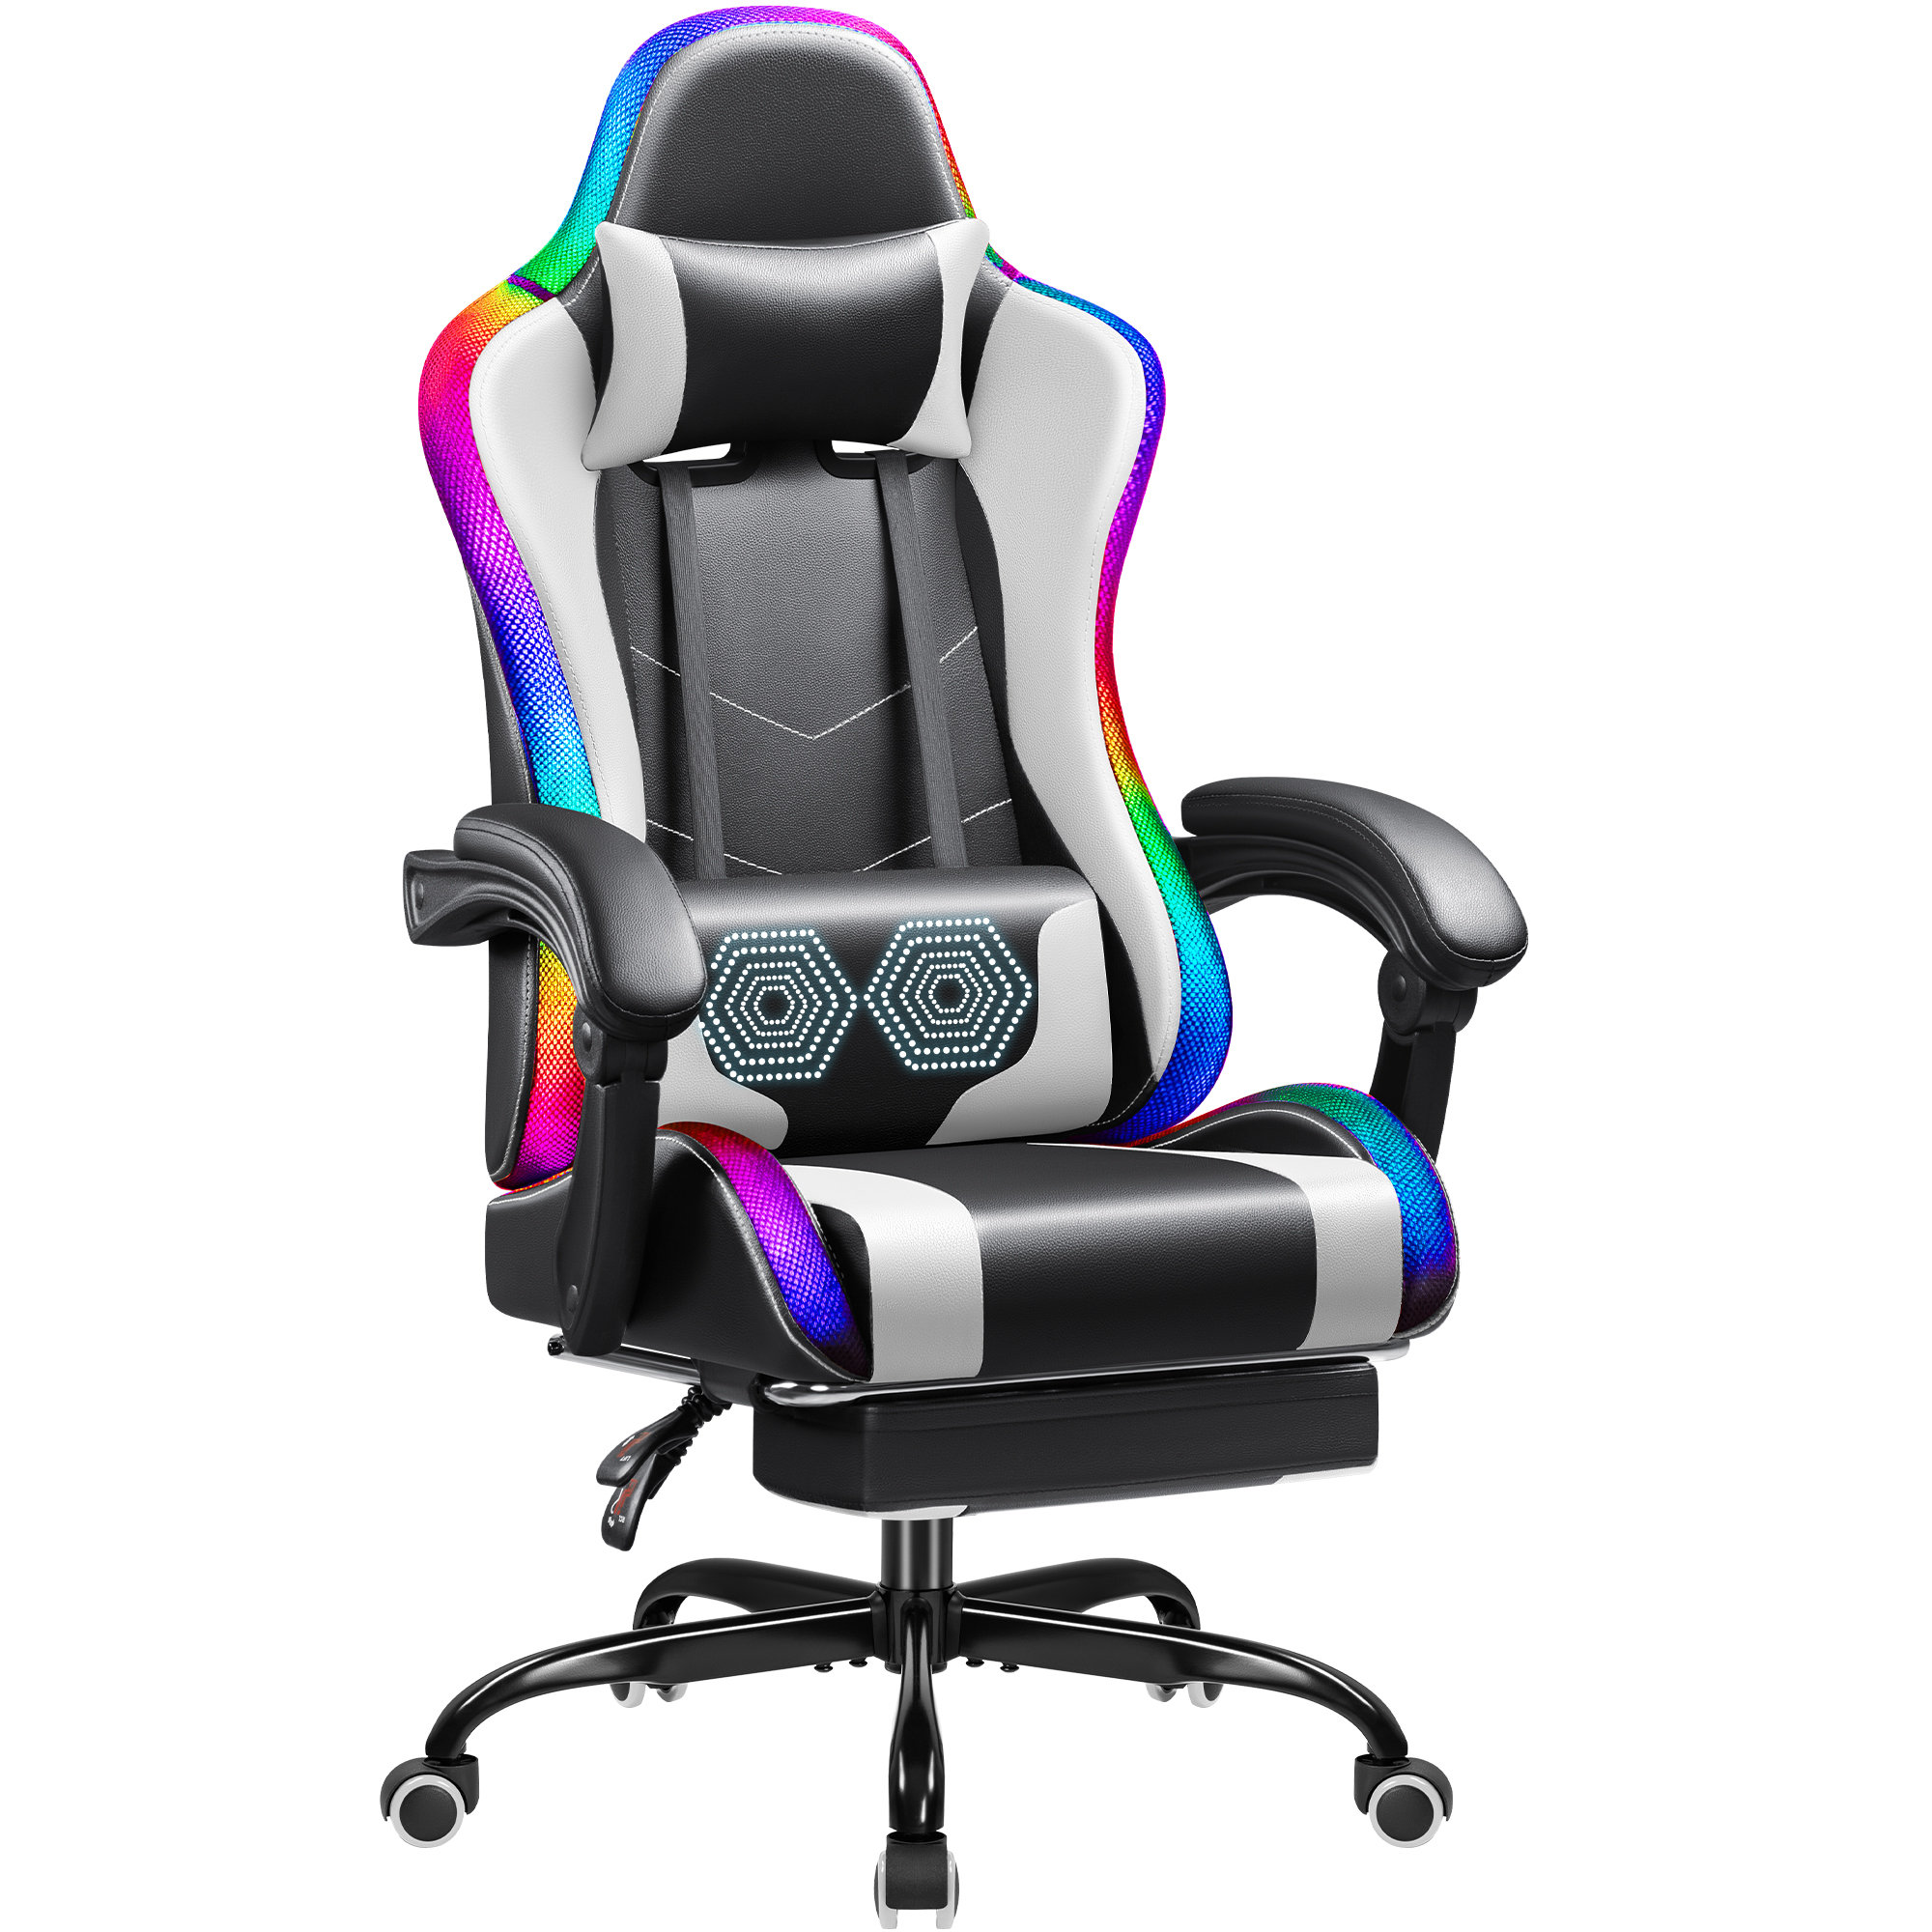 Vinsetto Gaming Chair with RGB LED Light, 3D Arm, Lumbar/Head